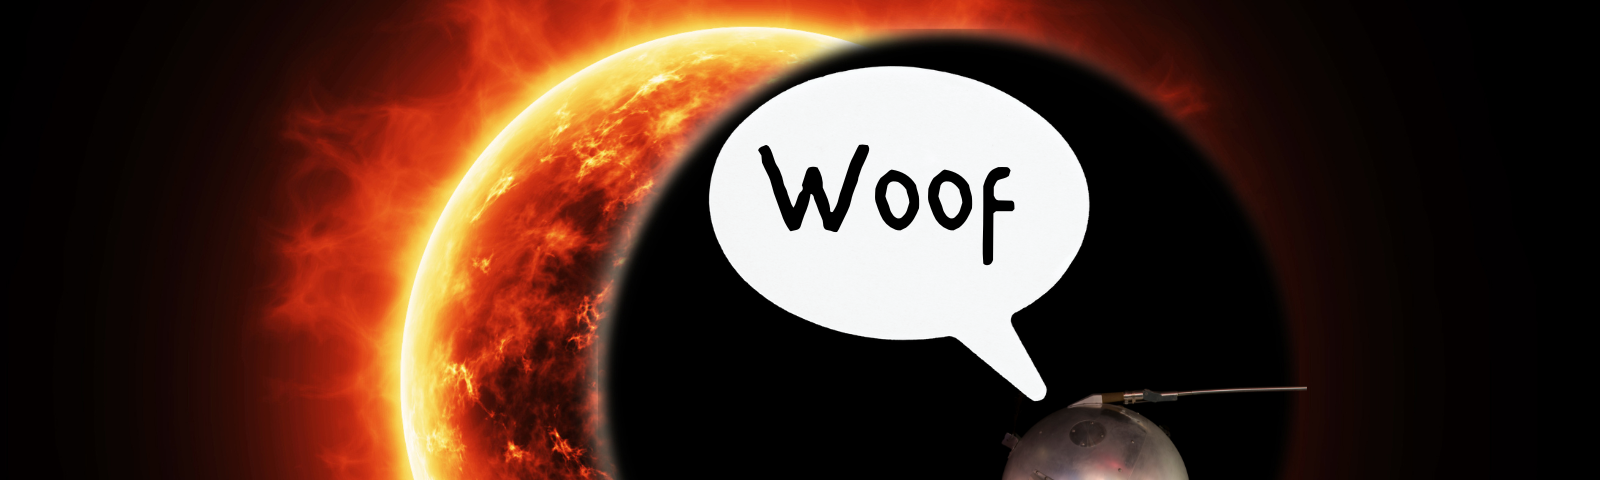 Picture of a solar eclipse with an image of Sputnik and the caption “Woof”